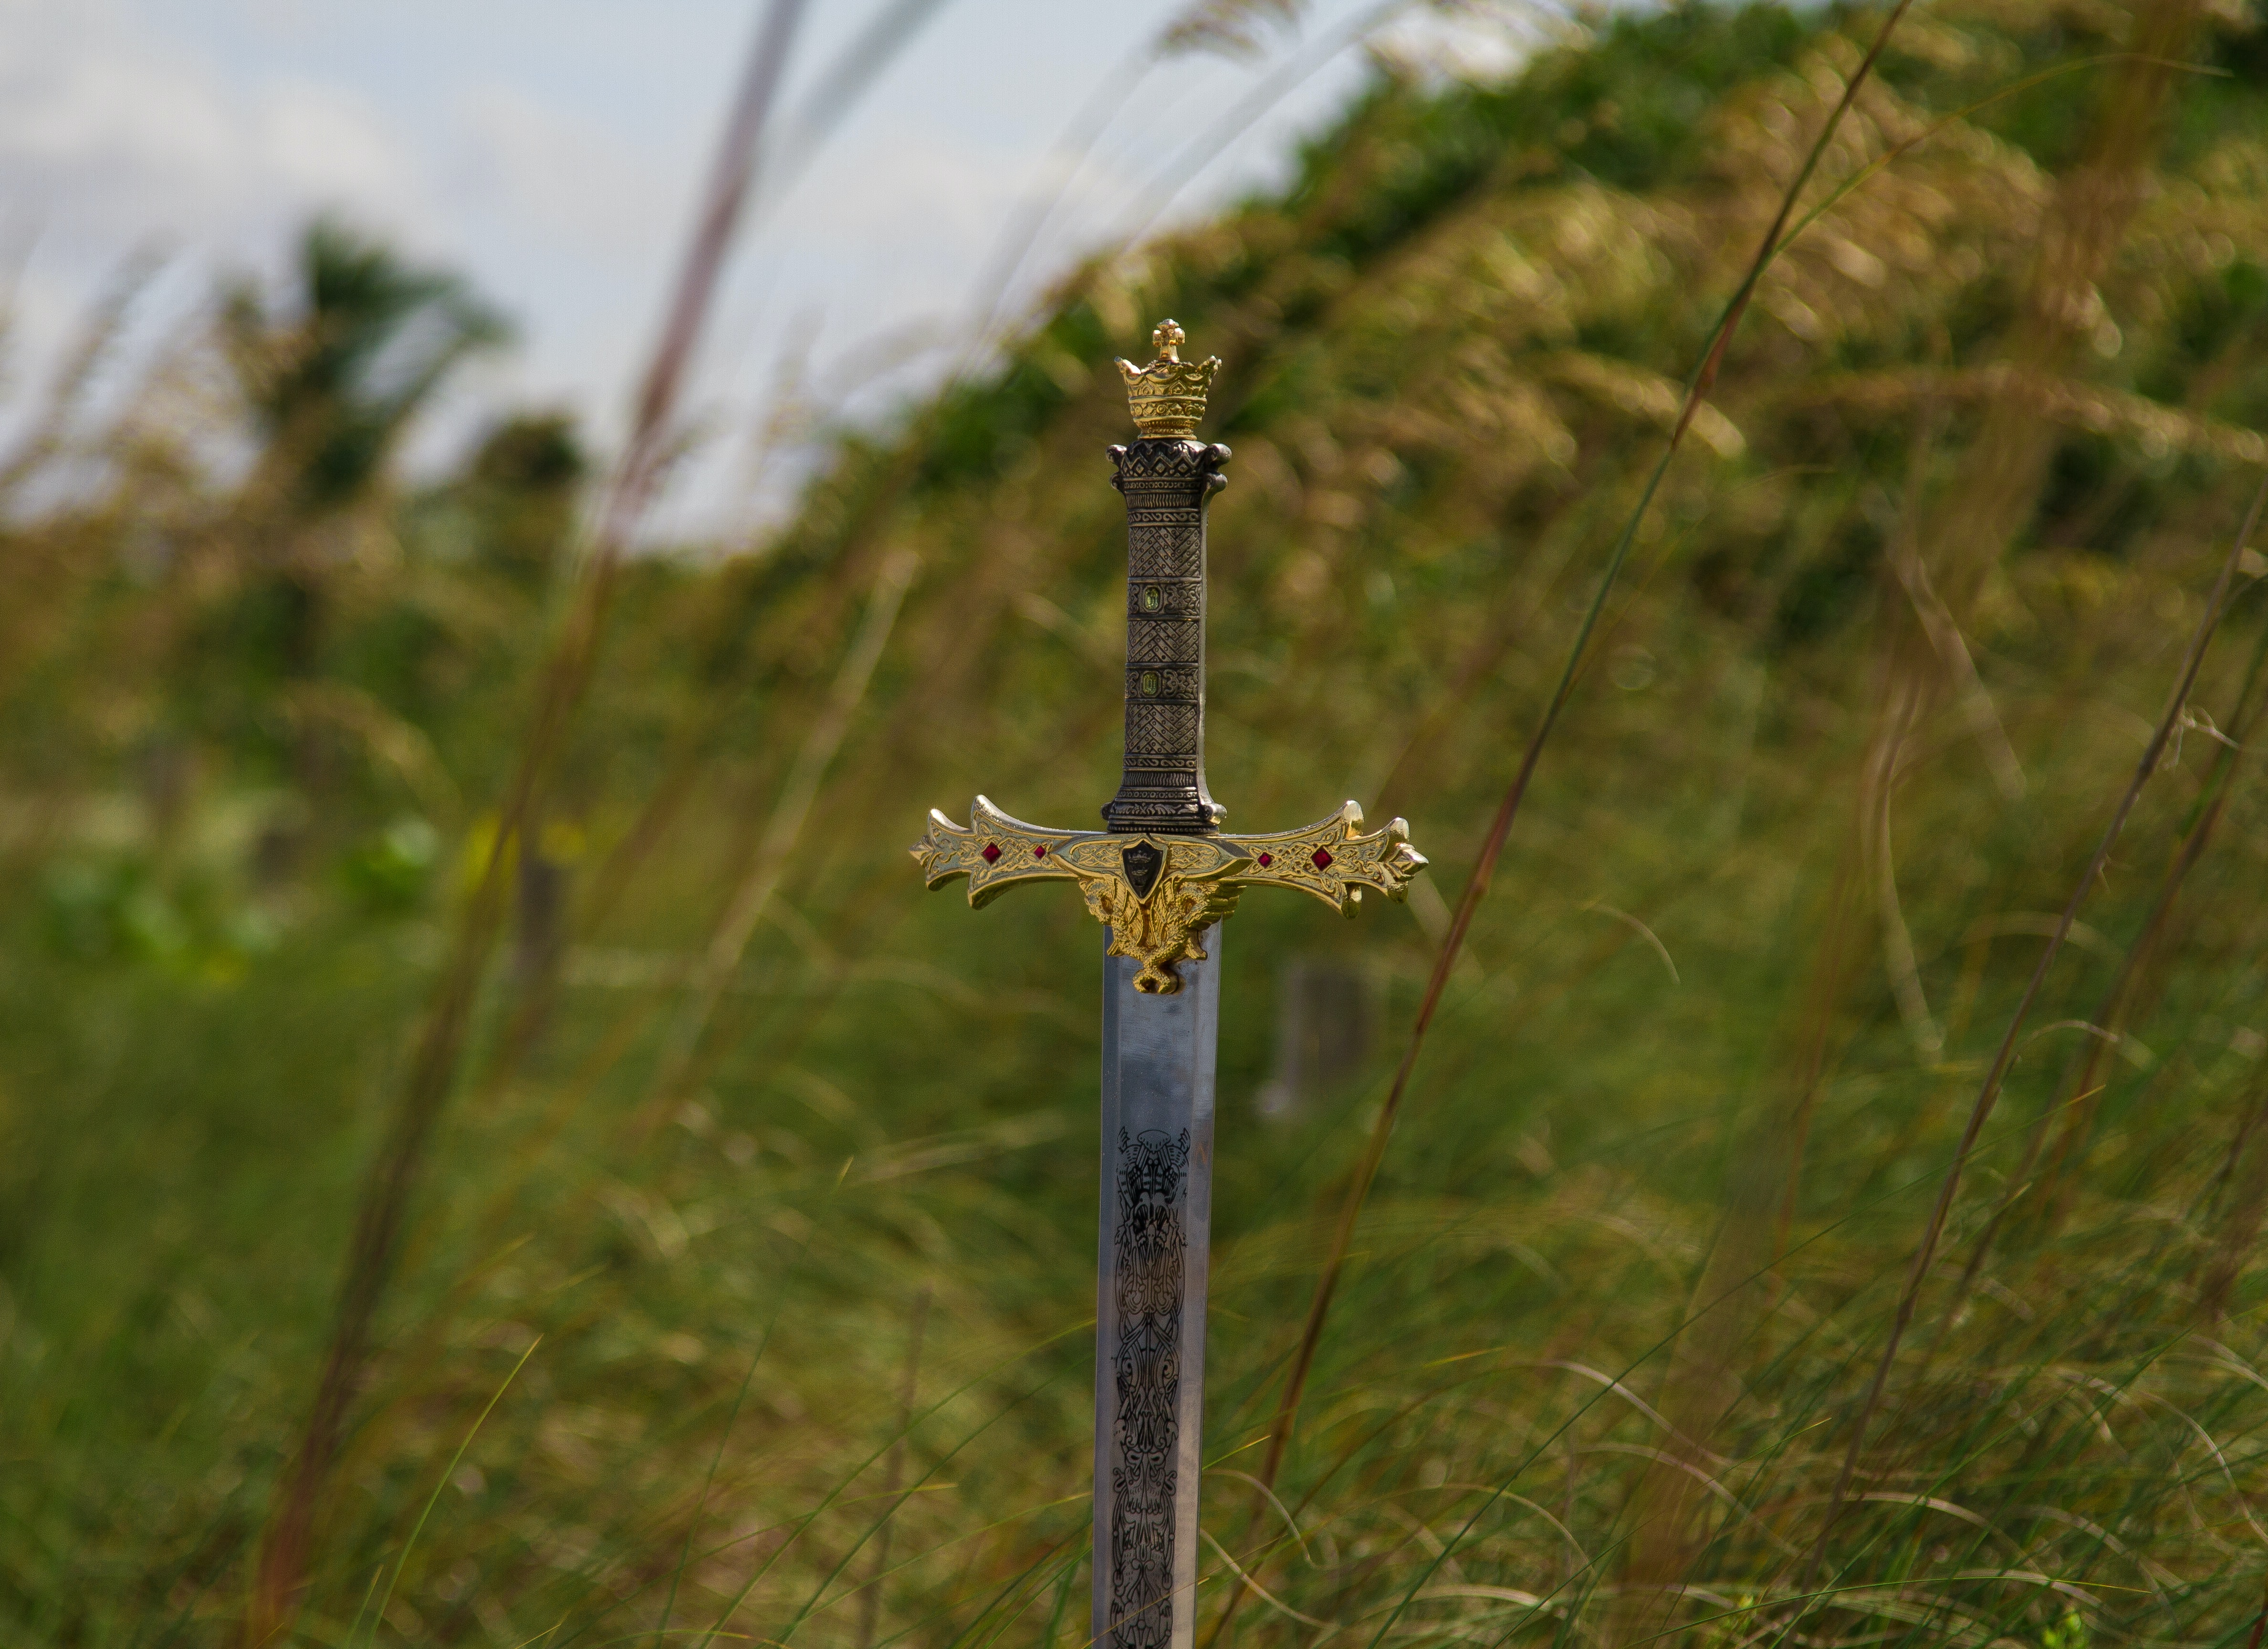 a sword standing in grassy area